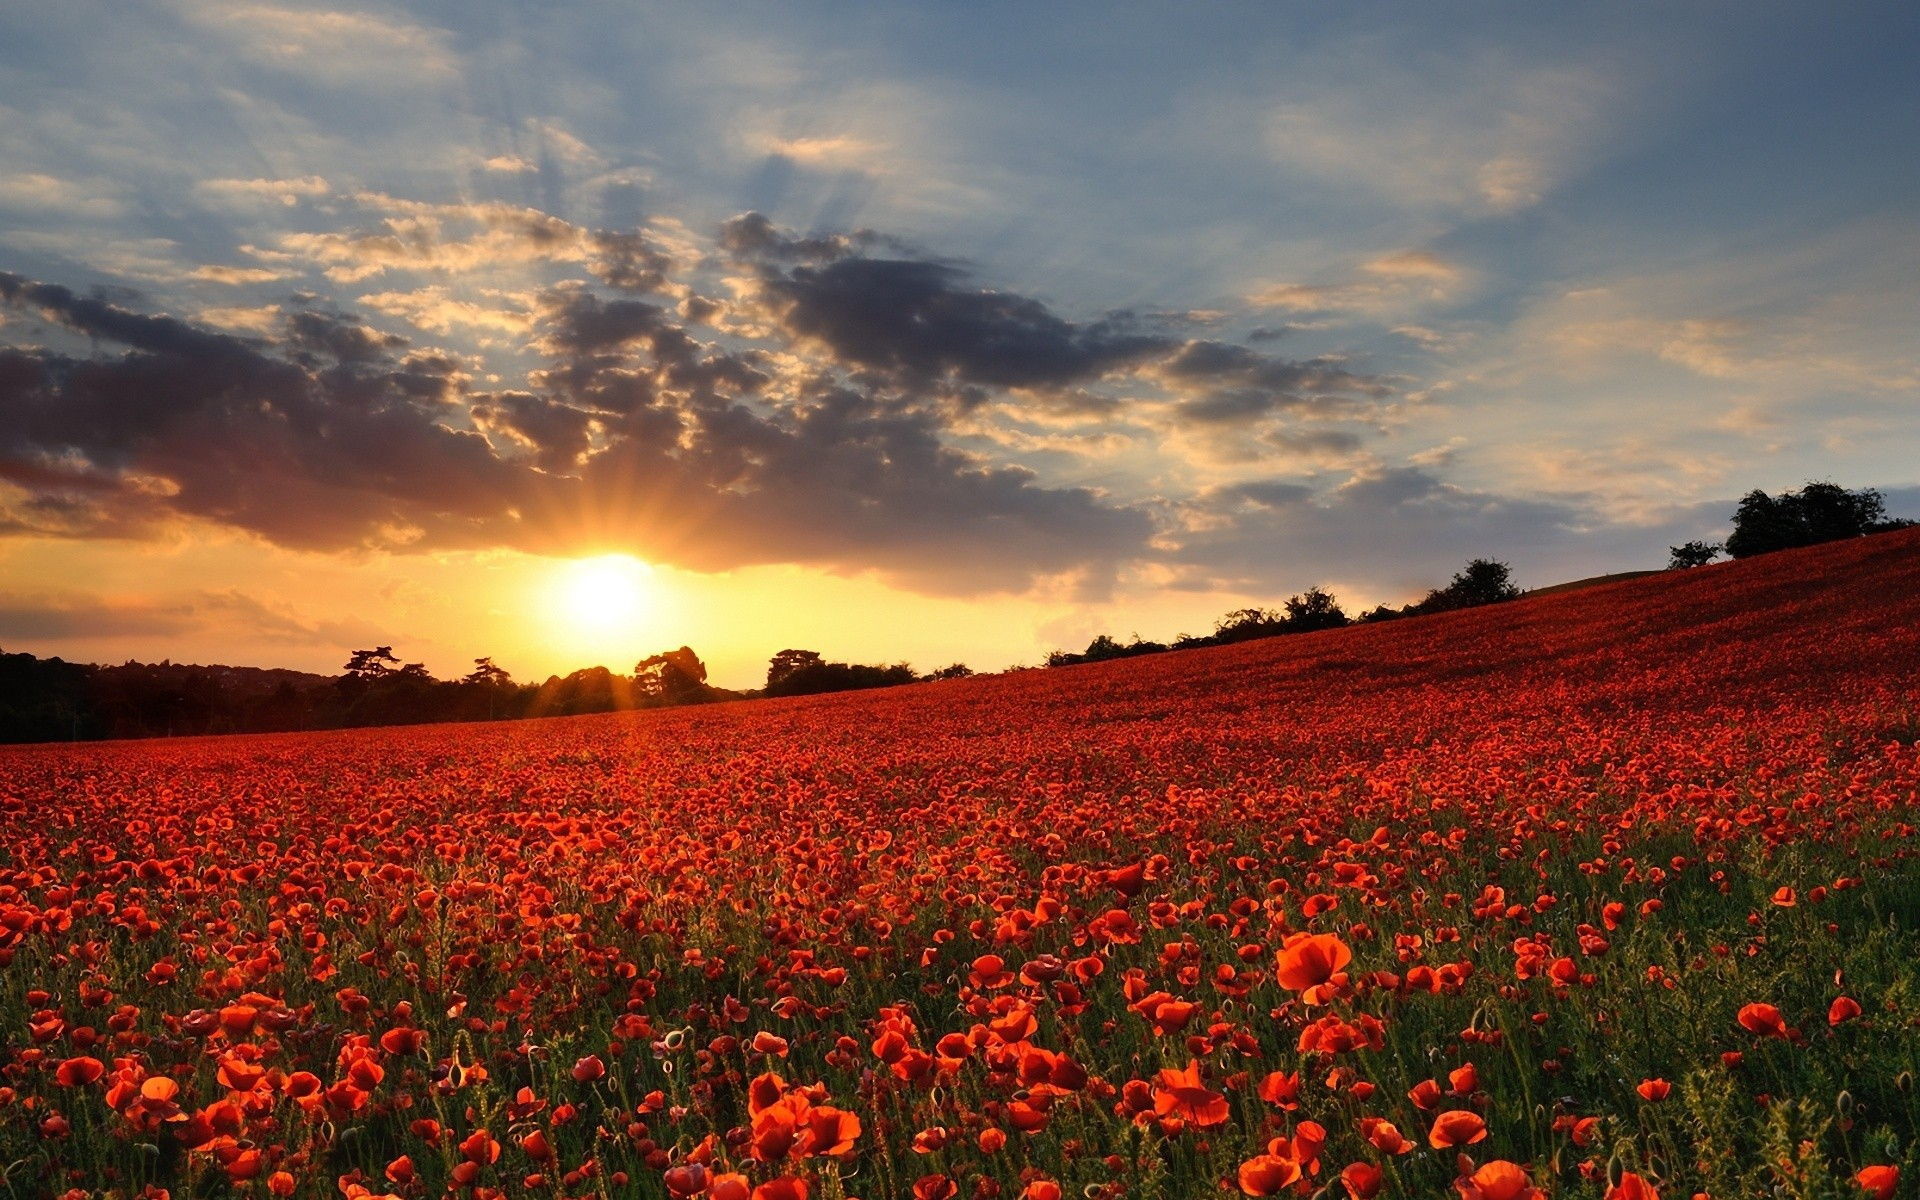 Field Of Poppies Wallpaper 50 Images